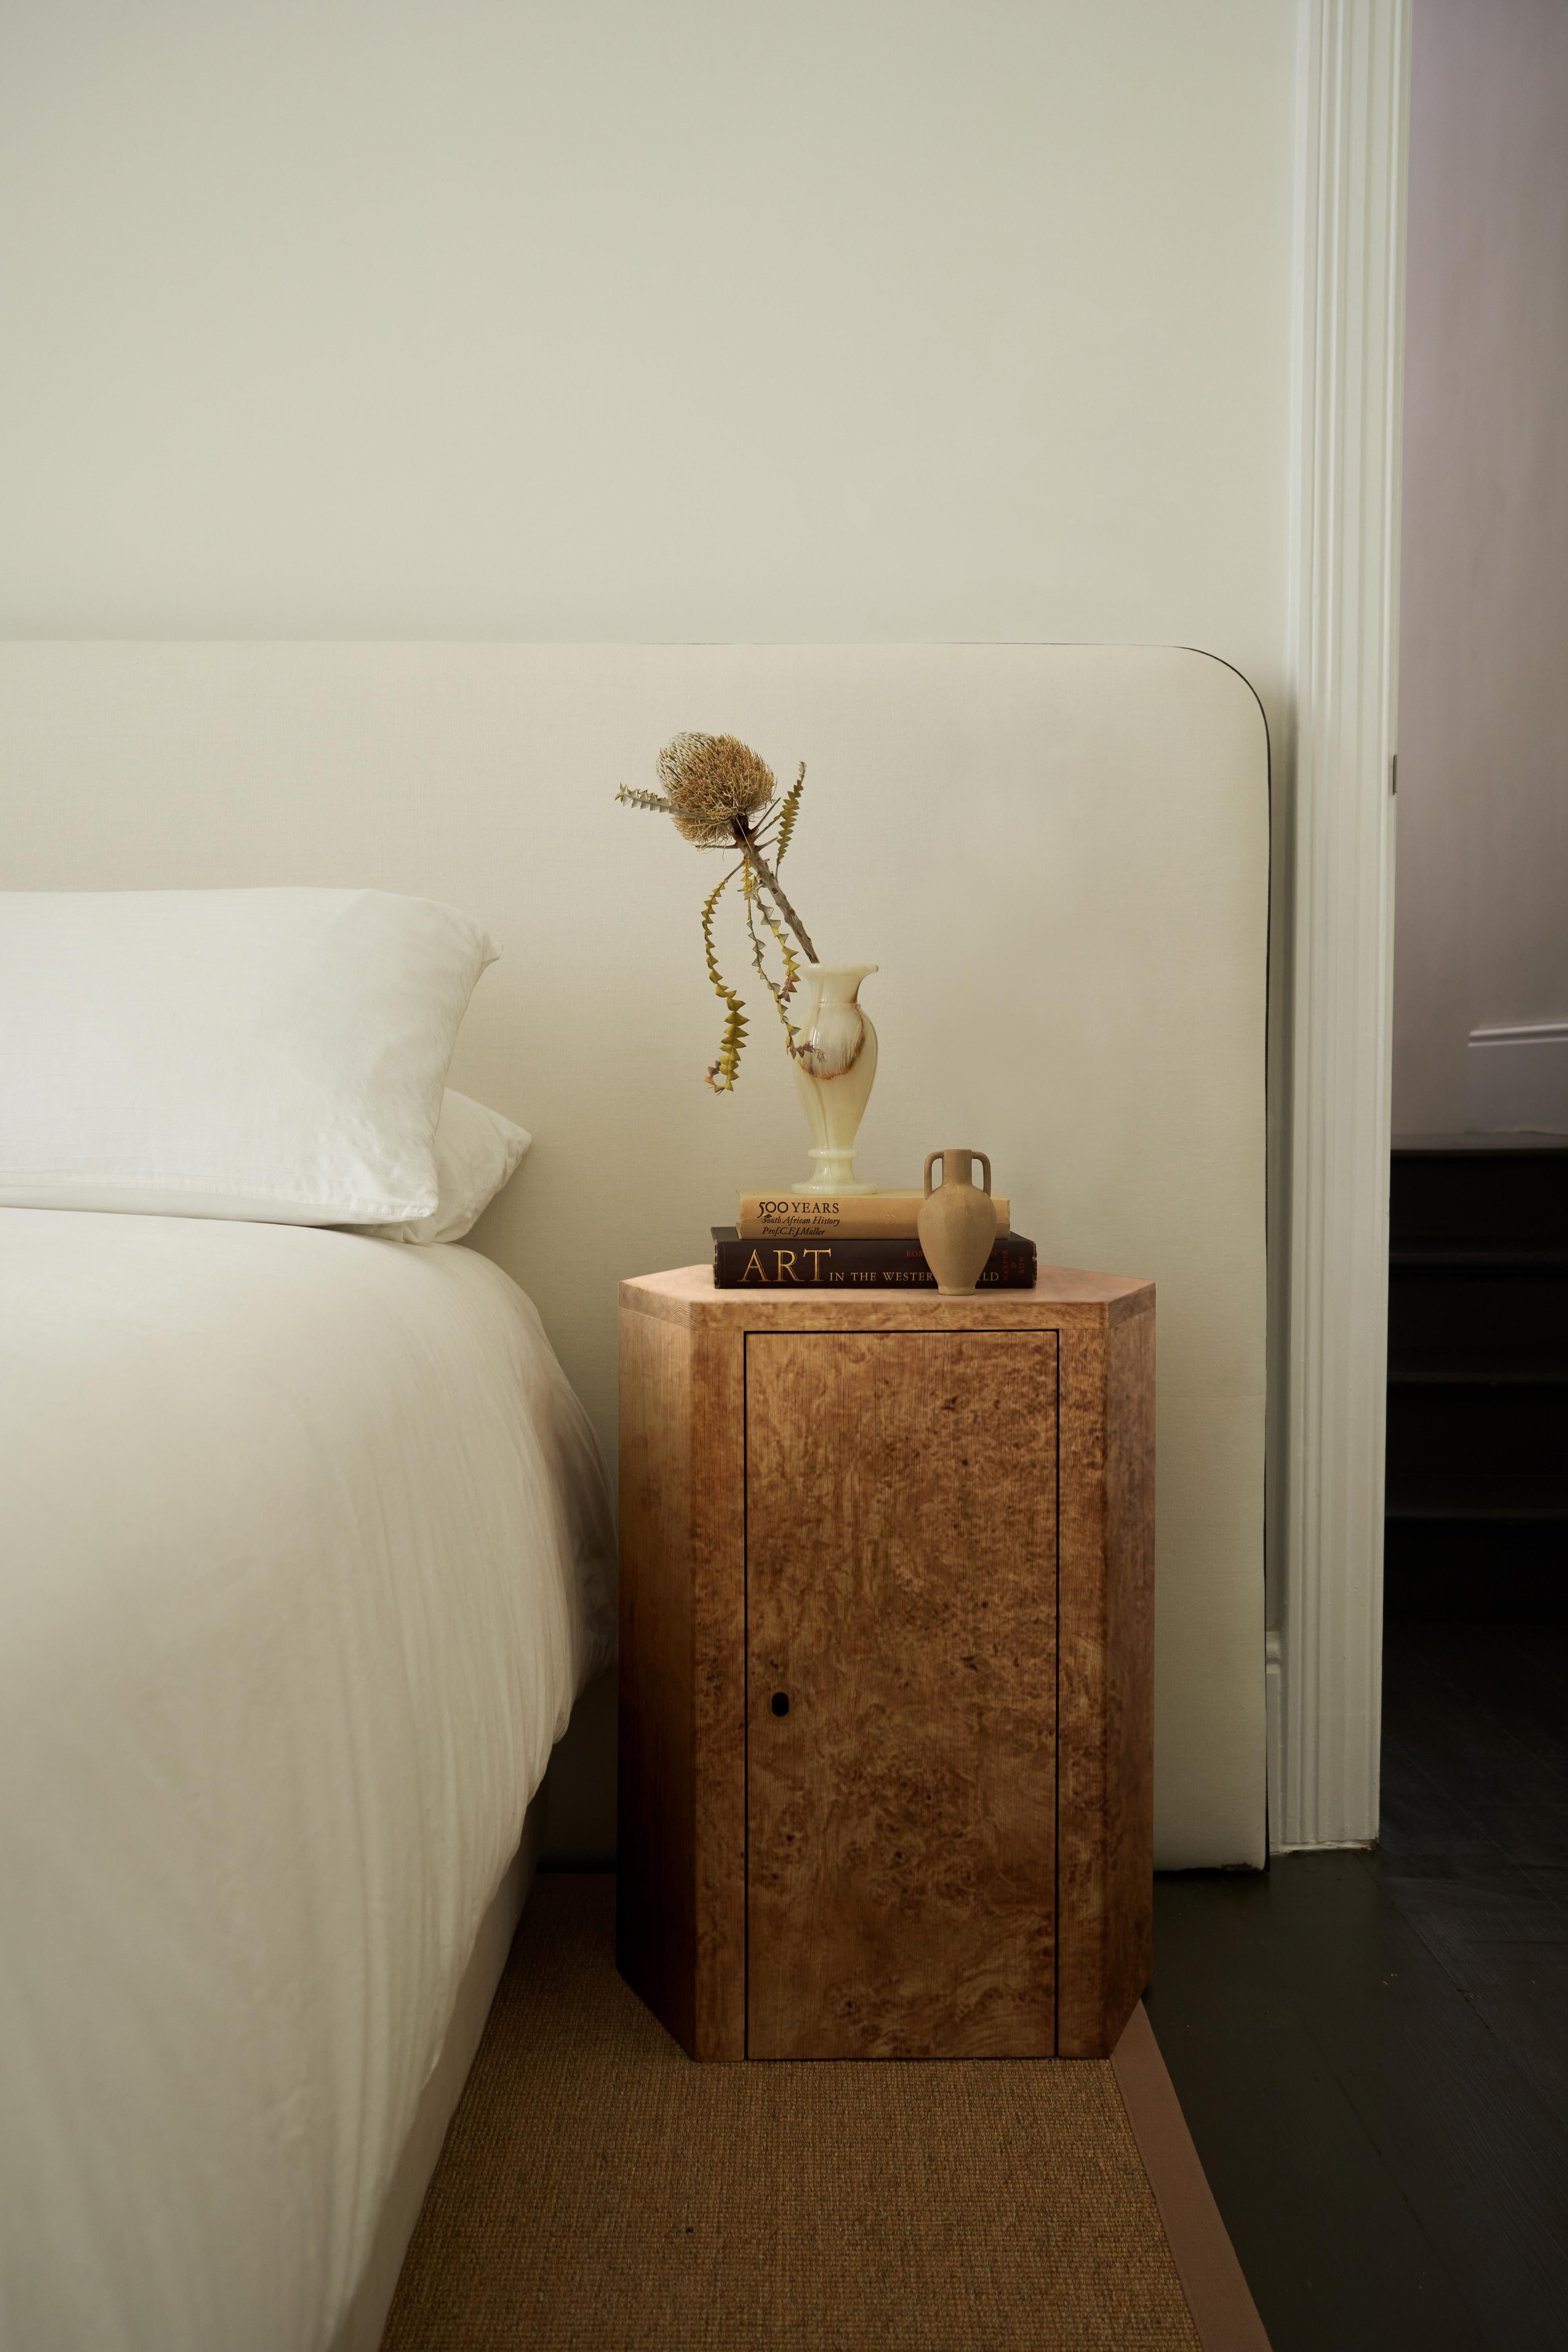 The Park nightstand is the epitome of exquisite craftsmanship, featuring meticulously proportioned dimensions and exceptional detailing that make it an ideal bedside companion. Our furniture pieces are thoughtfully crafted to become focal points